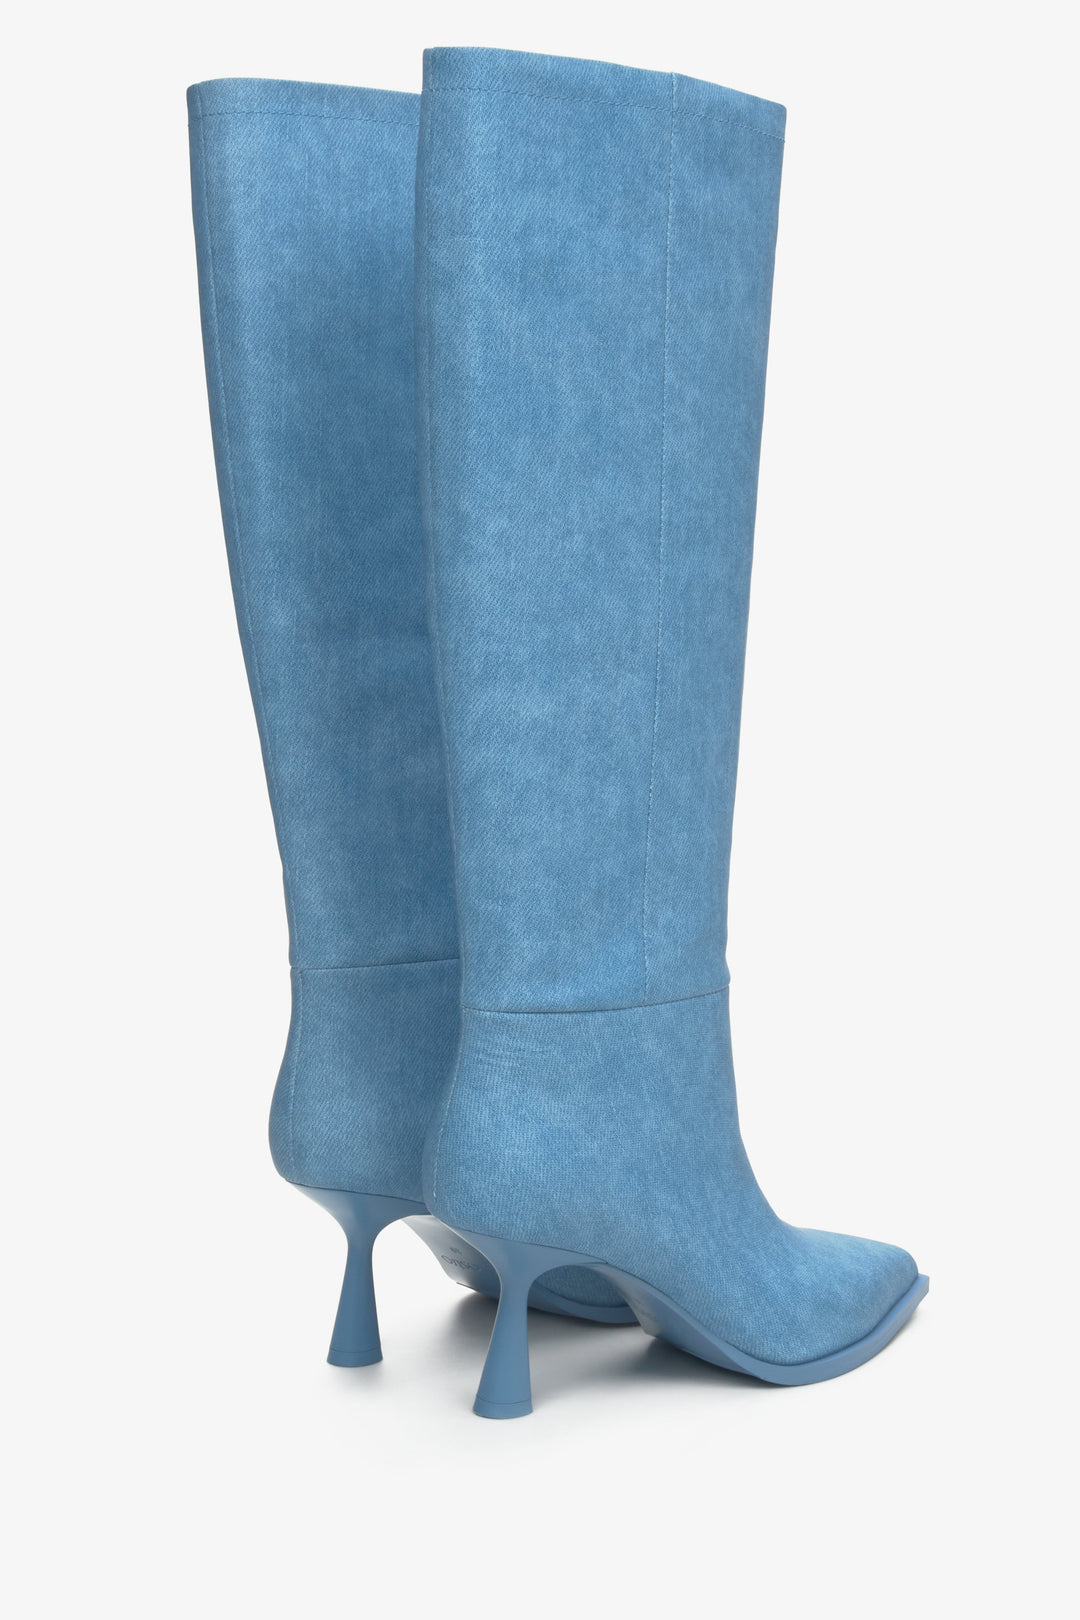 Blue women's boots with a stiletto heel by Estro - close-up on the back of the boot and side seam